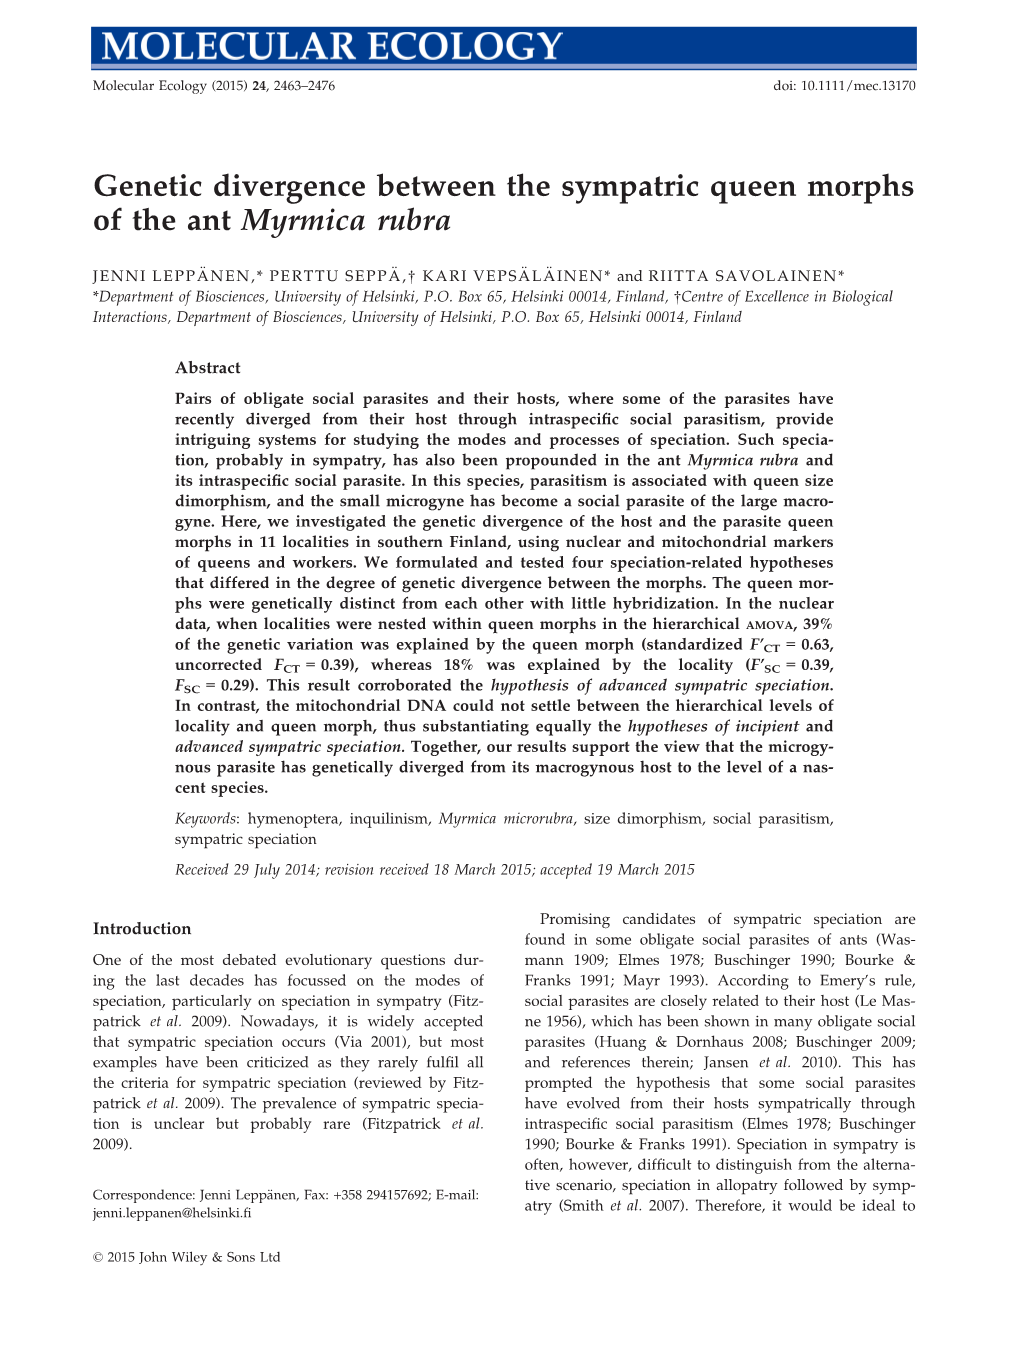 Genetic Divergence Between the Sympatric Queen Morphs of the Ant Myrmica Rubra